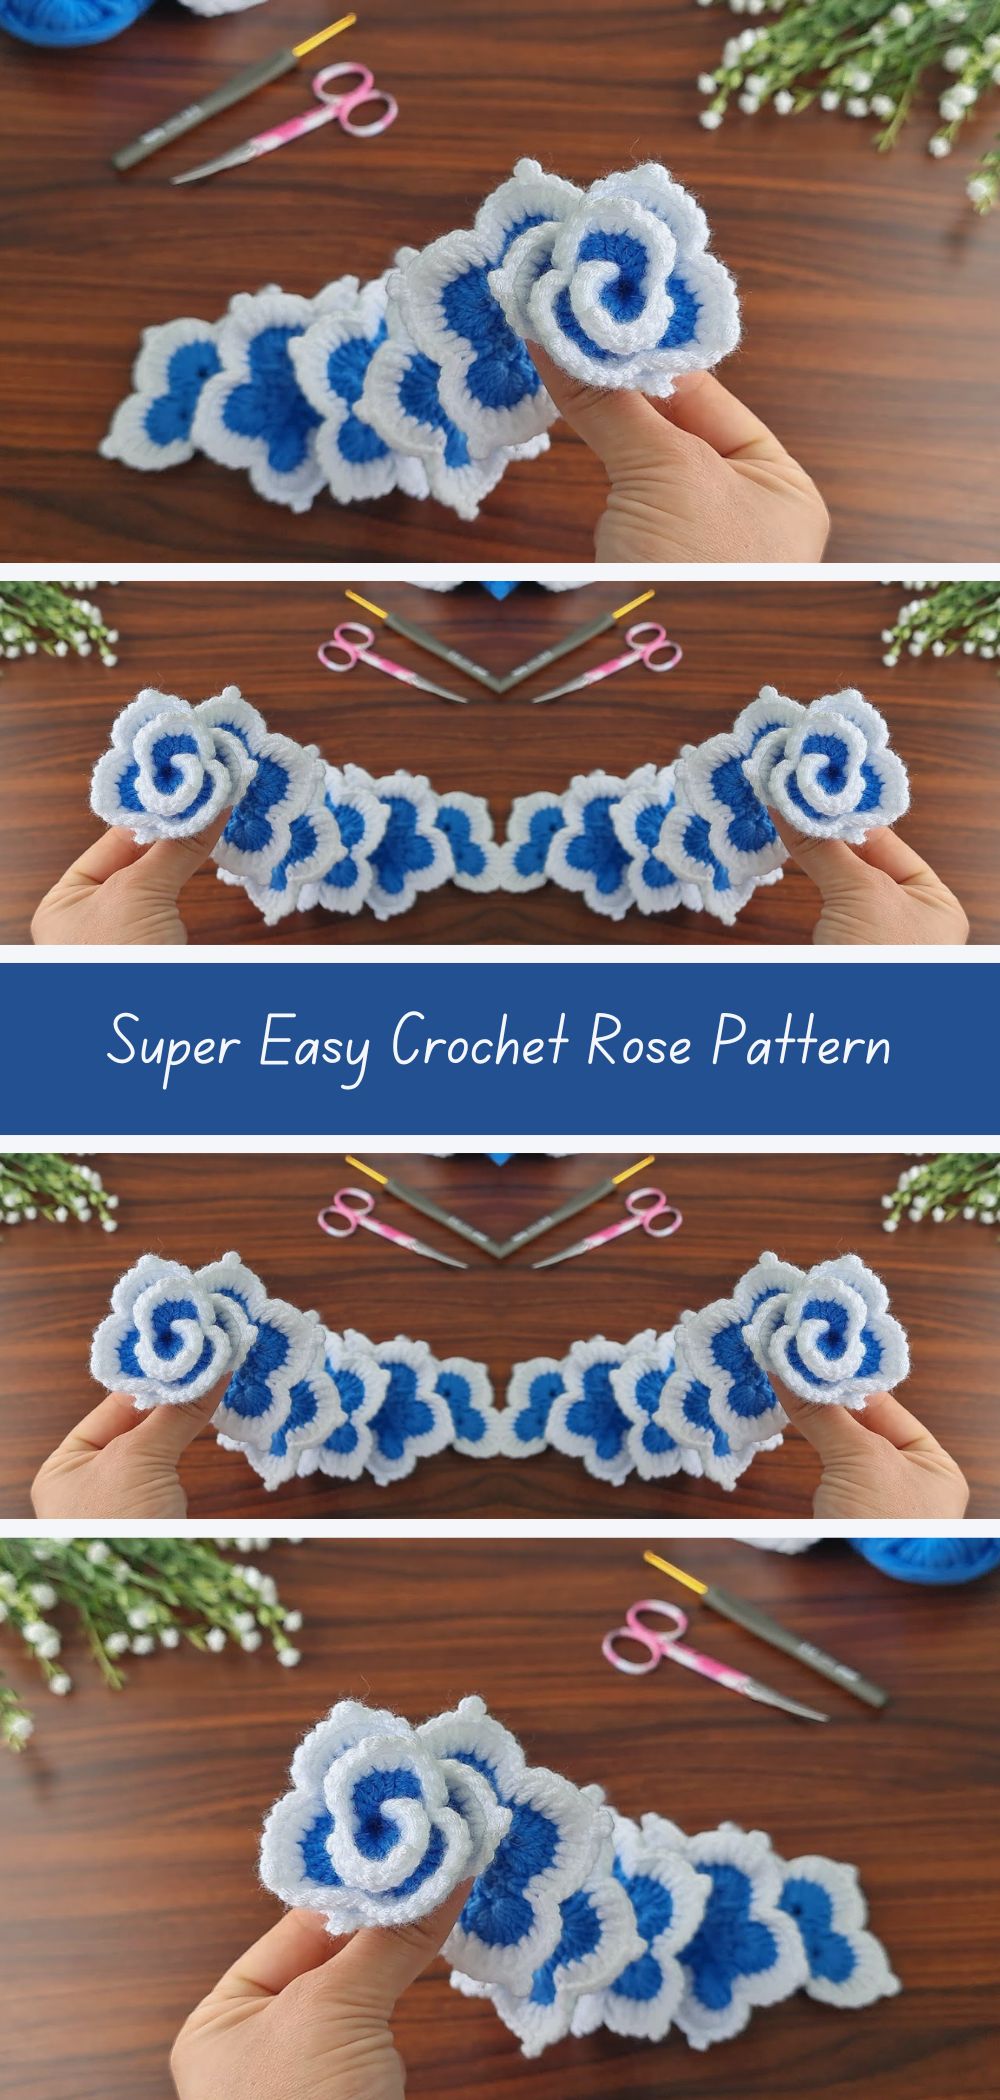 Super Easy Crochet Rose Pattern - Create lovely crochet roses with this simple and easy-to-follow pattern